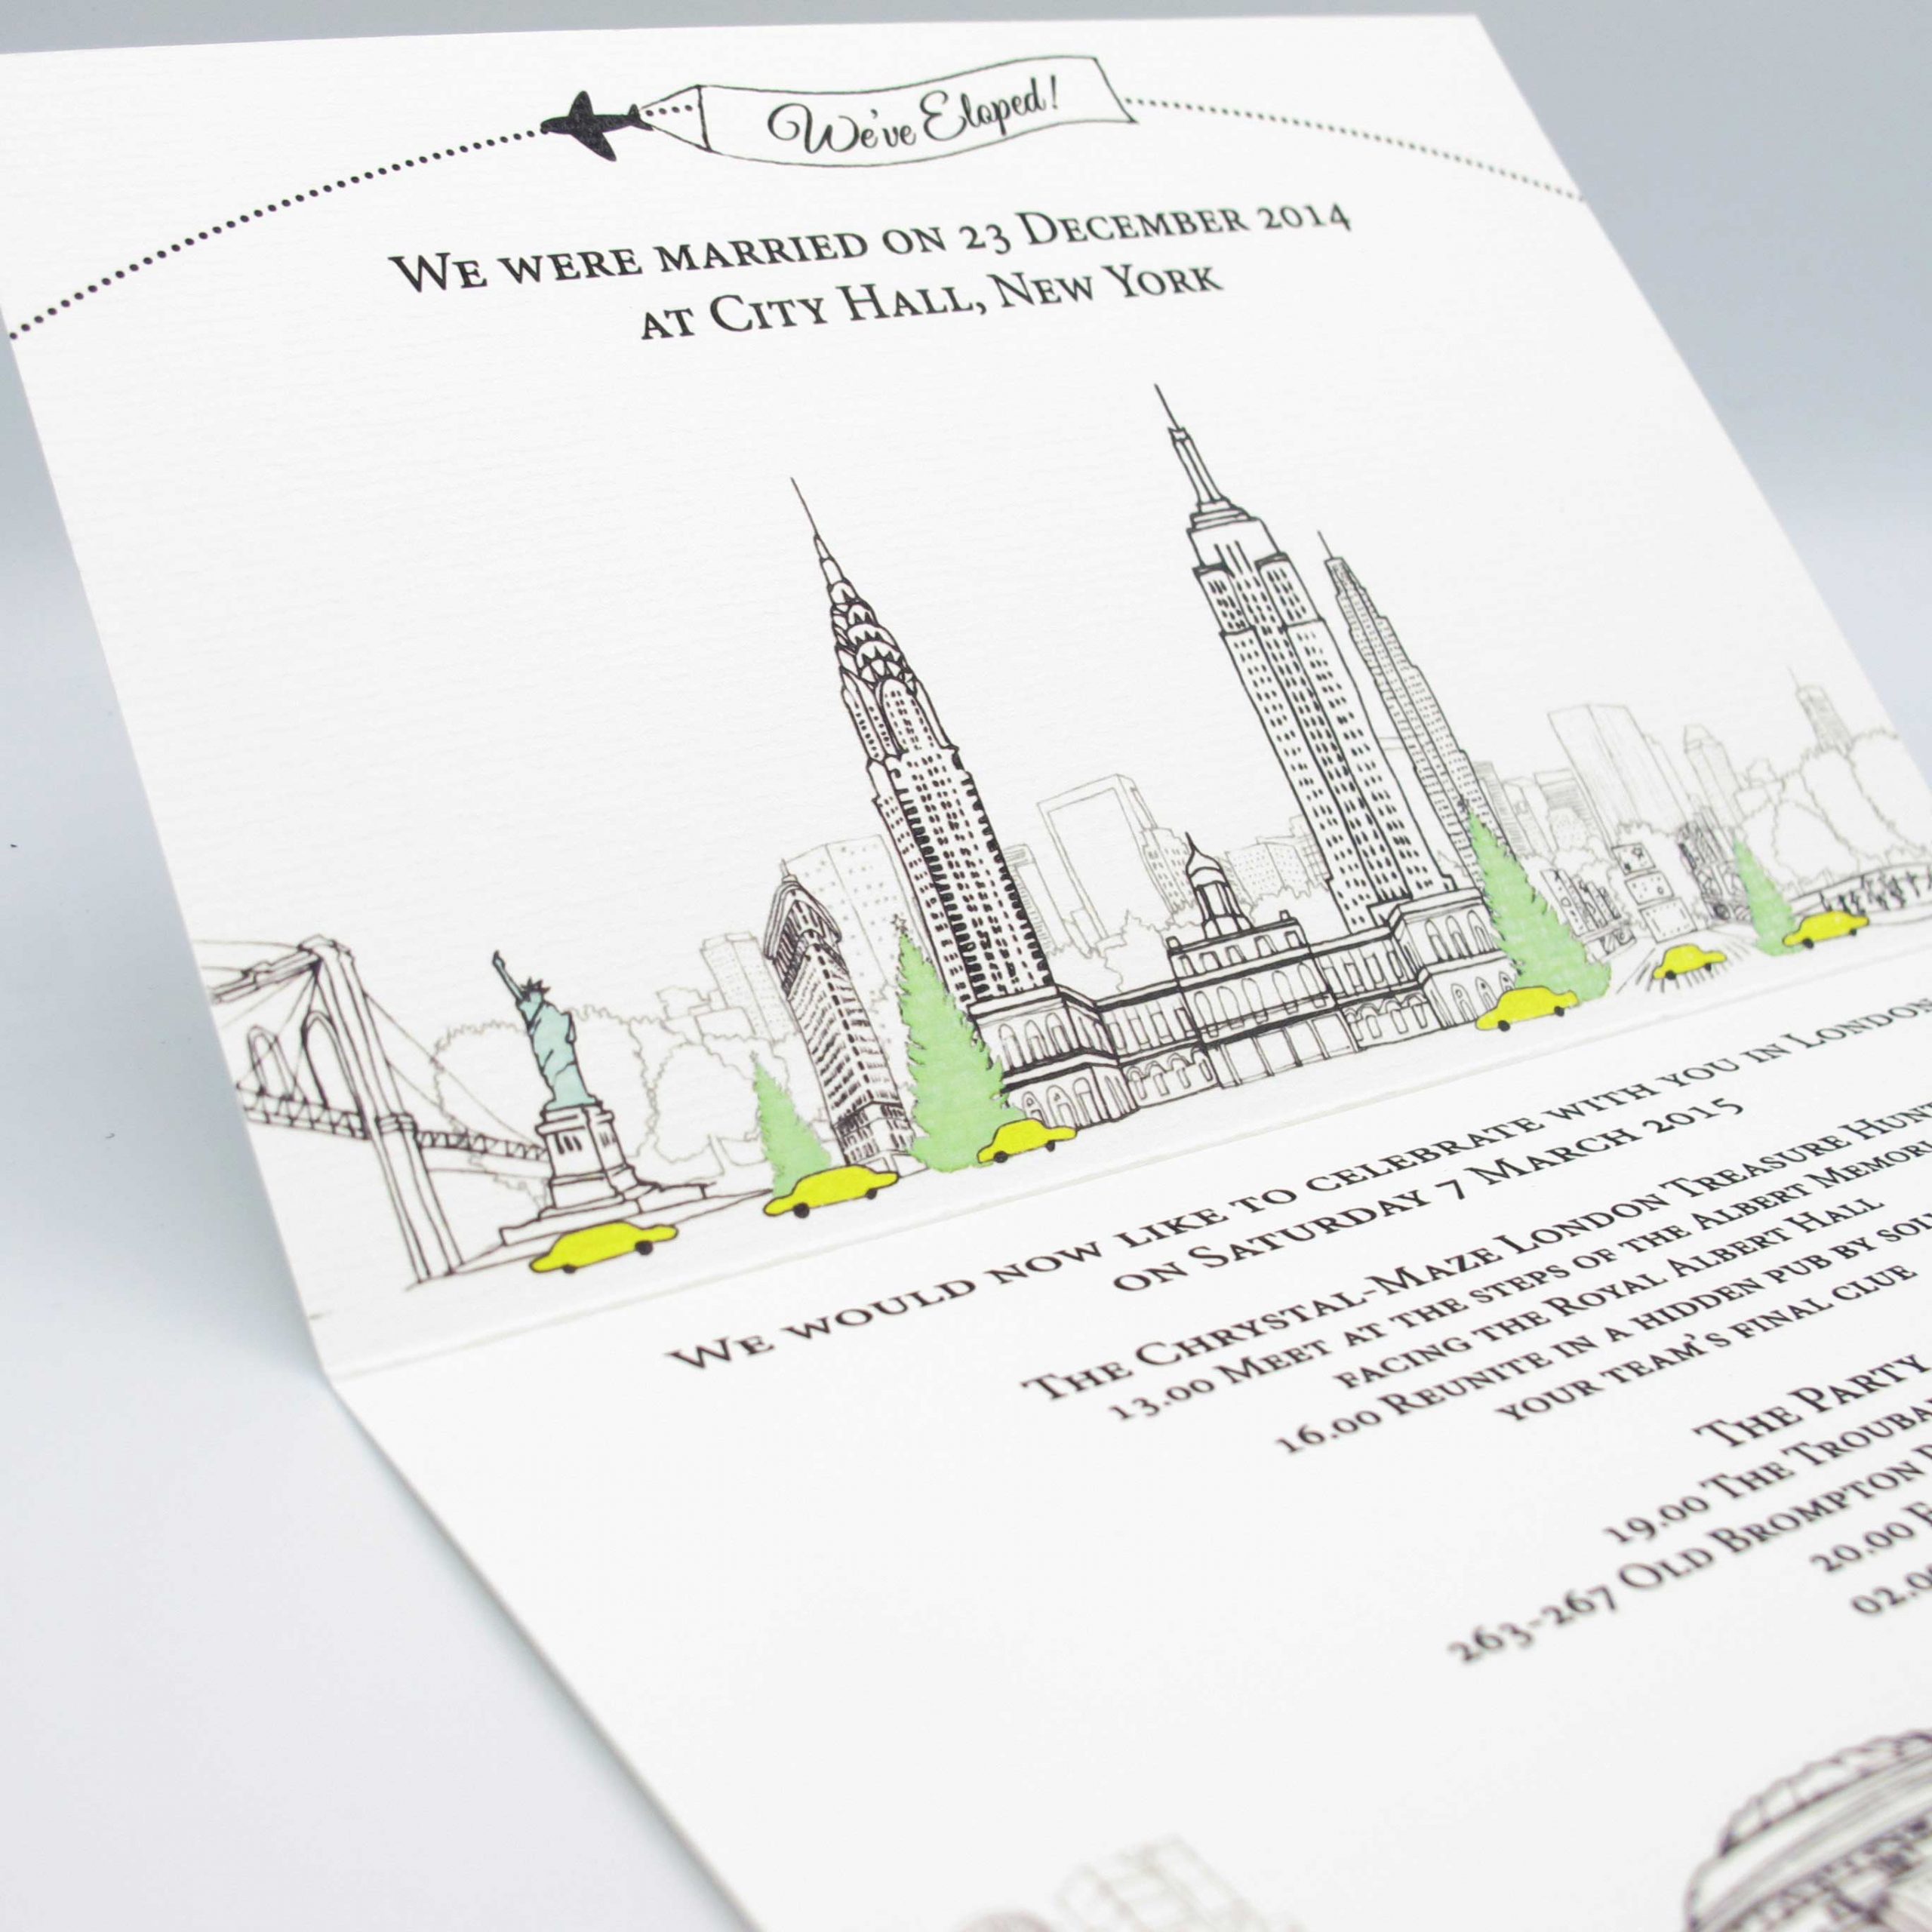 New York and London wedding invitations featuring skyline of both cities